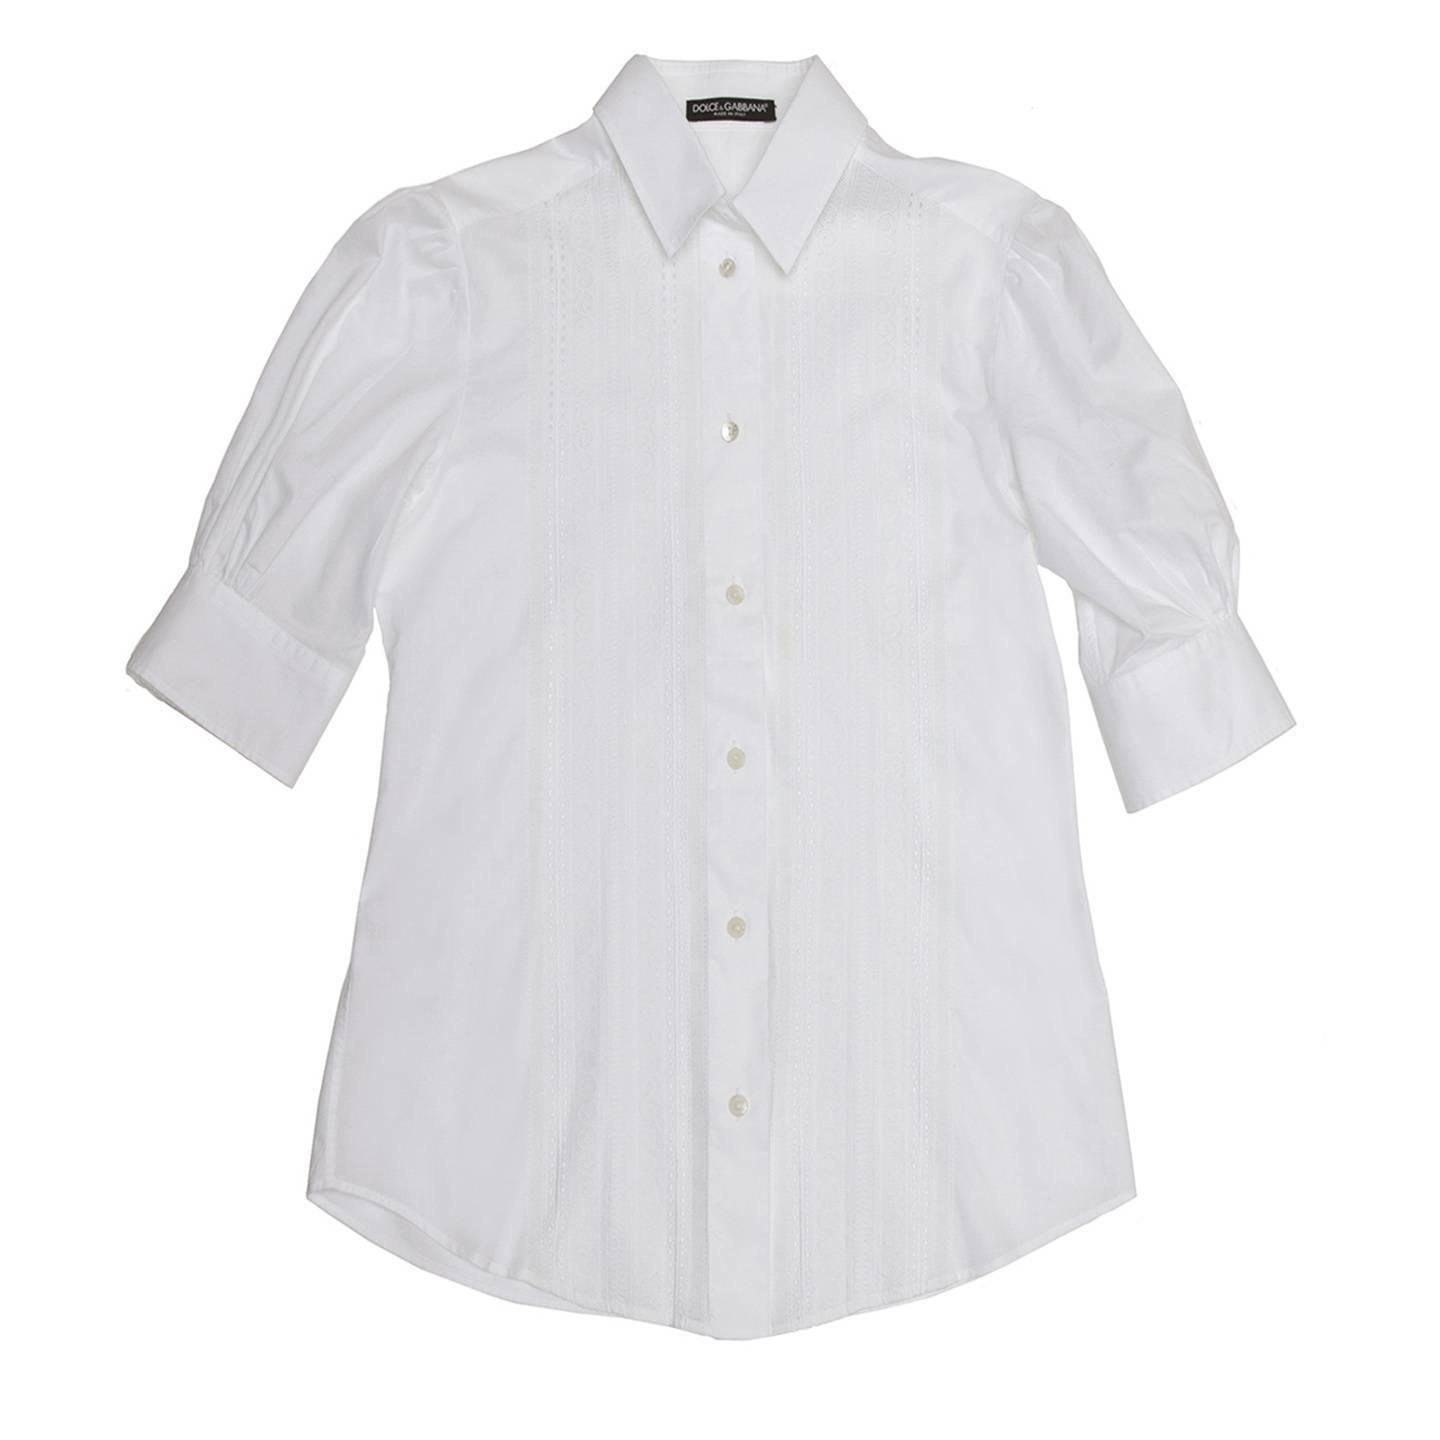 White cotton shirt with a front panel beautifully decorated by a fine cotton lace and a fix inverted pleat to enrich the center back. The body is quite shaped thanks to the back darts and the sleeves are short above elbow, slightly puffed and